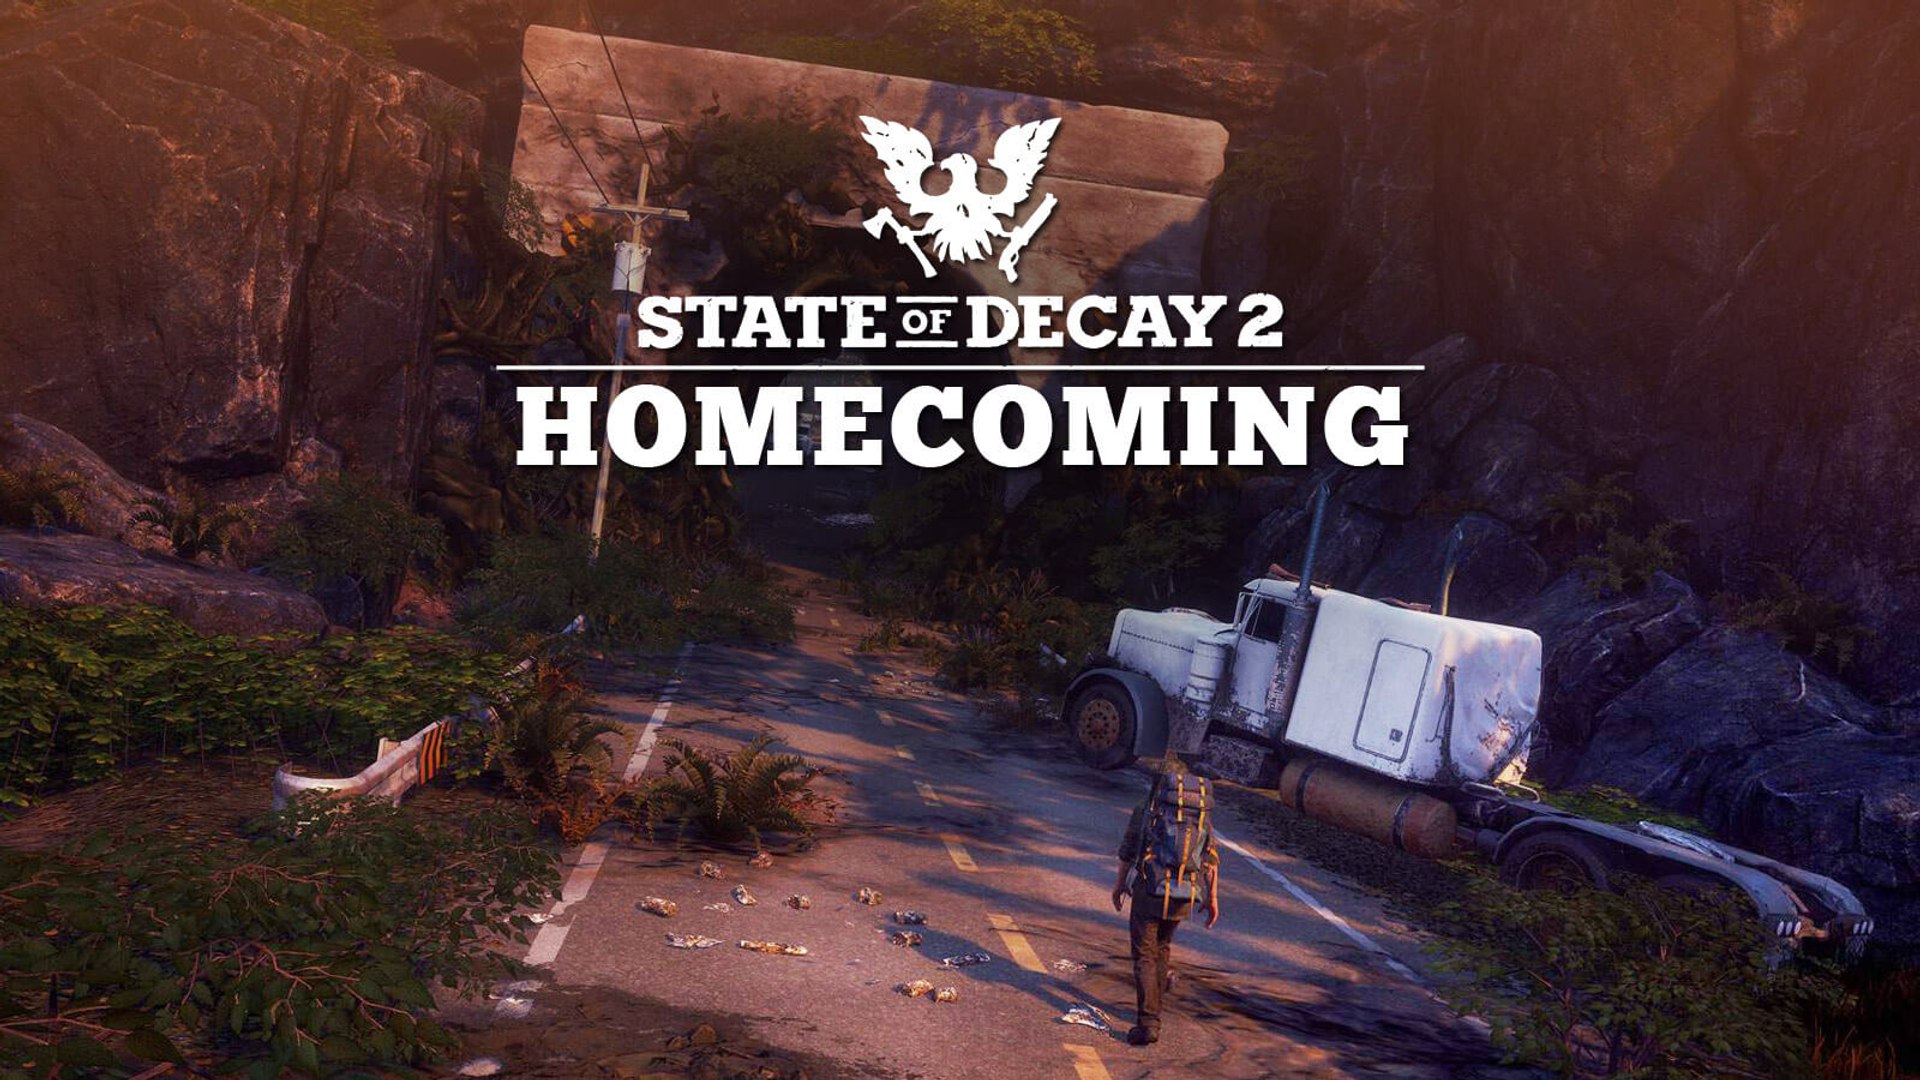 New State of Decay 2 Trailer Offers, What Looks Like, a Story